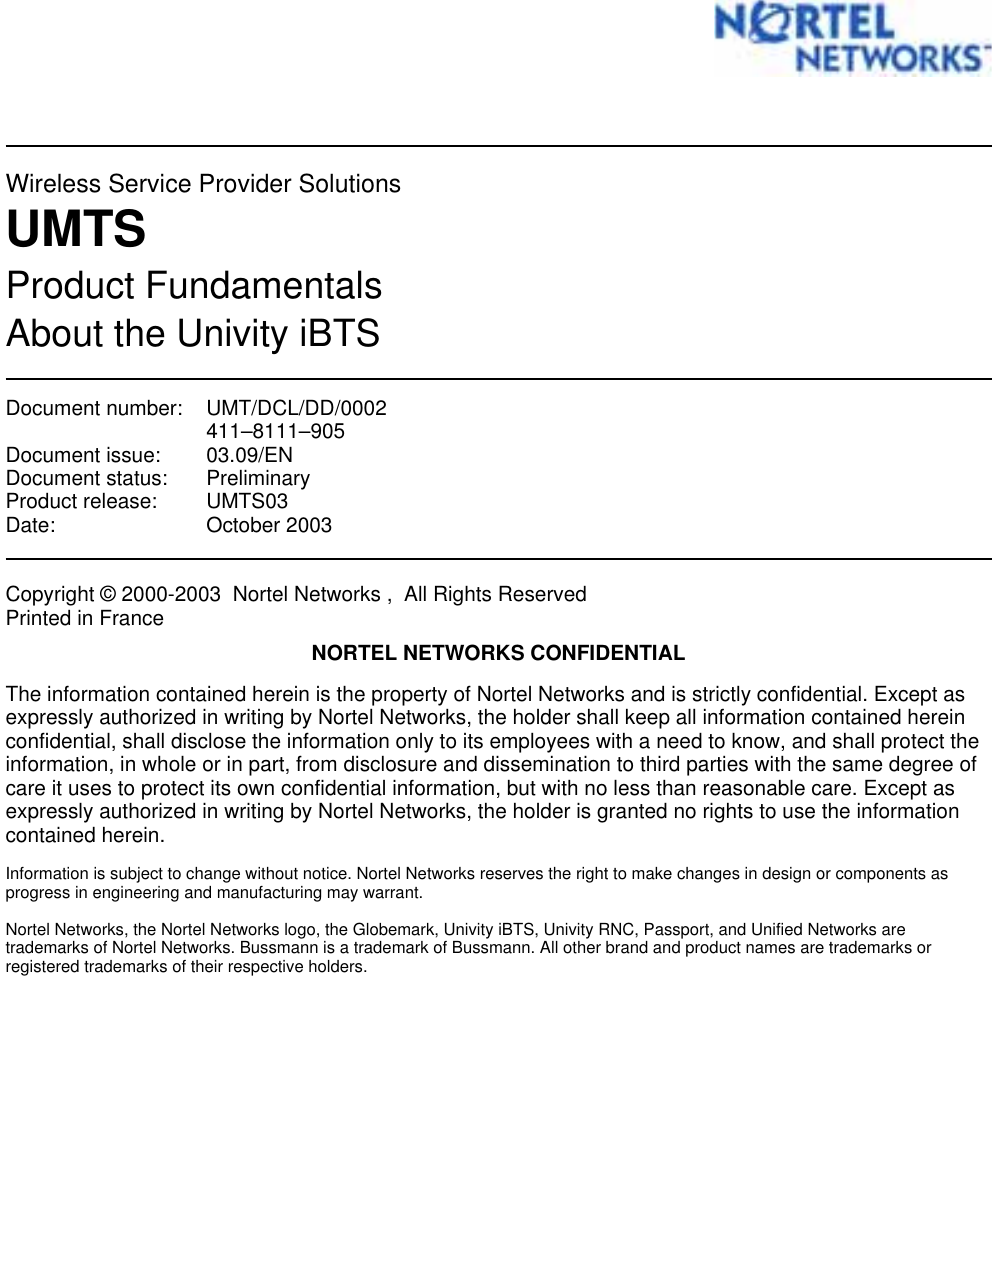 Wireless Service Provider SolutionsUMTSProduct FundamentalsAbout the Univity iBTSDocument number: UMT/DCL/DD/0002411–8111–905Document issue: 03.09/ENDocument status: PreliminaryProduct release: UMTS03Date: October 2003Copyright © 2000-2003 Nortel Networks , All Rights ReservedPrinted in FranceNORTEL NETWORKS CONFIDENTIALThe information contained herein is the property of Nortel Networks and is strictly confidential. Except asexpressly authorized in writing by Nortel Networks, the holder shall keep all information contained hereinconfidential, shall disclose the information only to its employees with a need to know, and shall protect theinformation, in whole or in part, from disclosure and dissemination to third parties with the same degree ofcare it uses to protect its own confidential information, but with no less than reasonable care. Except asexpressly authorized in writing by Nortel Networks, the holder is granted no rights to use the informationcontained herein.Information is subject to change without notice. Nortel Networks reserves the right to make changes in design or components asprogress in engineering and manufacturing may warrant.Nortel Networks, the Nortel Networks logo, the Globemark, Univity iBTS, Univity RNC, Passport, and Unified Networks aretrademarks of Nortel Networks. Bussmann is a trademark of Bussmann. All other brand and product names are trademarks orregistered trademarks of their respective holders.